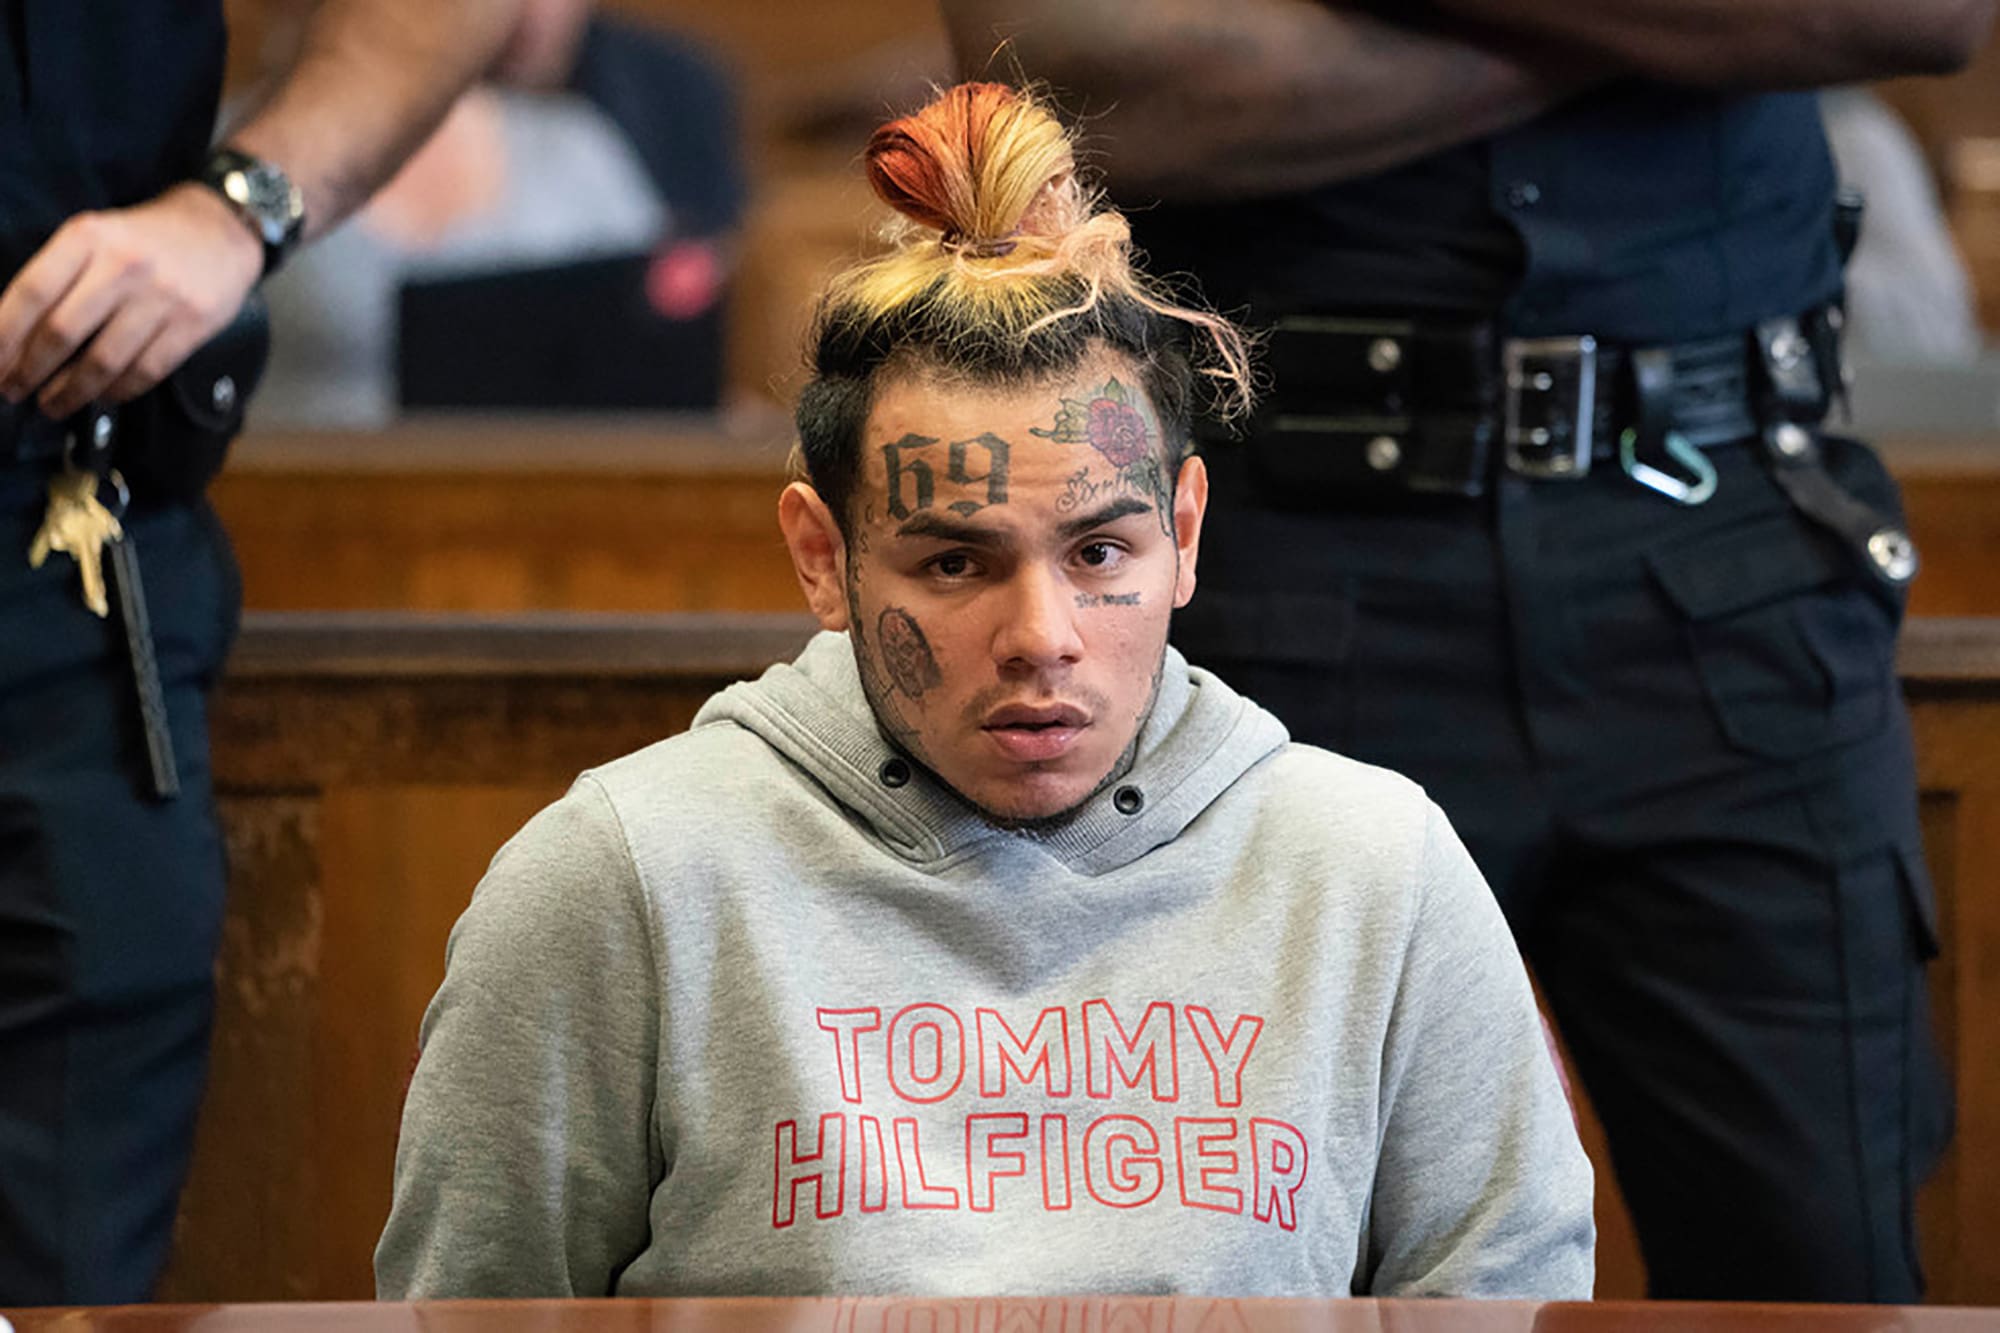 Tekashi 69 Must Have An Excellent Lawyer: The Word On The Street Is That If He Cooperates, All Charges Will Be Dropped